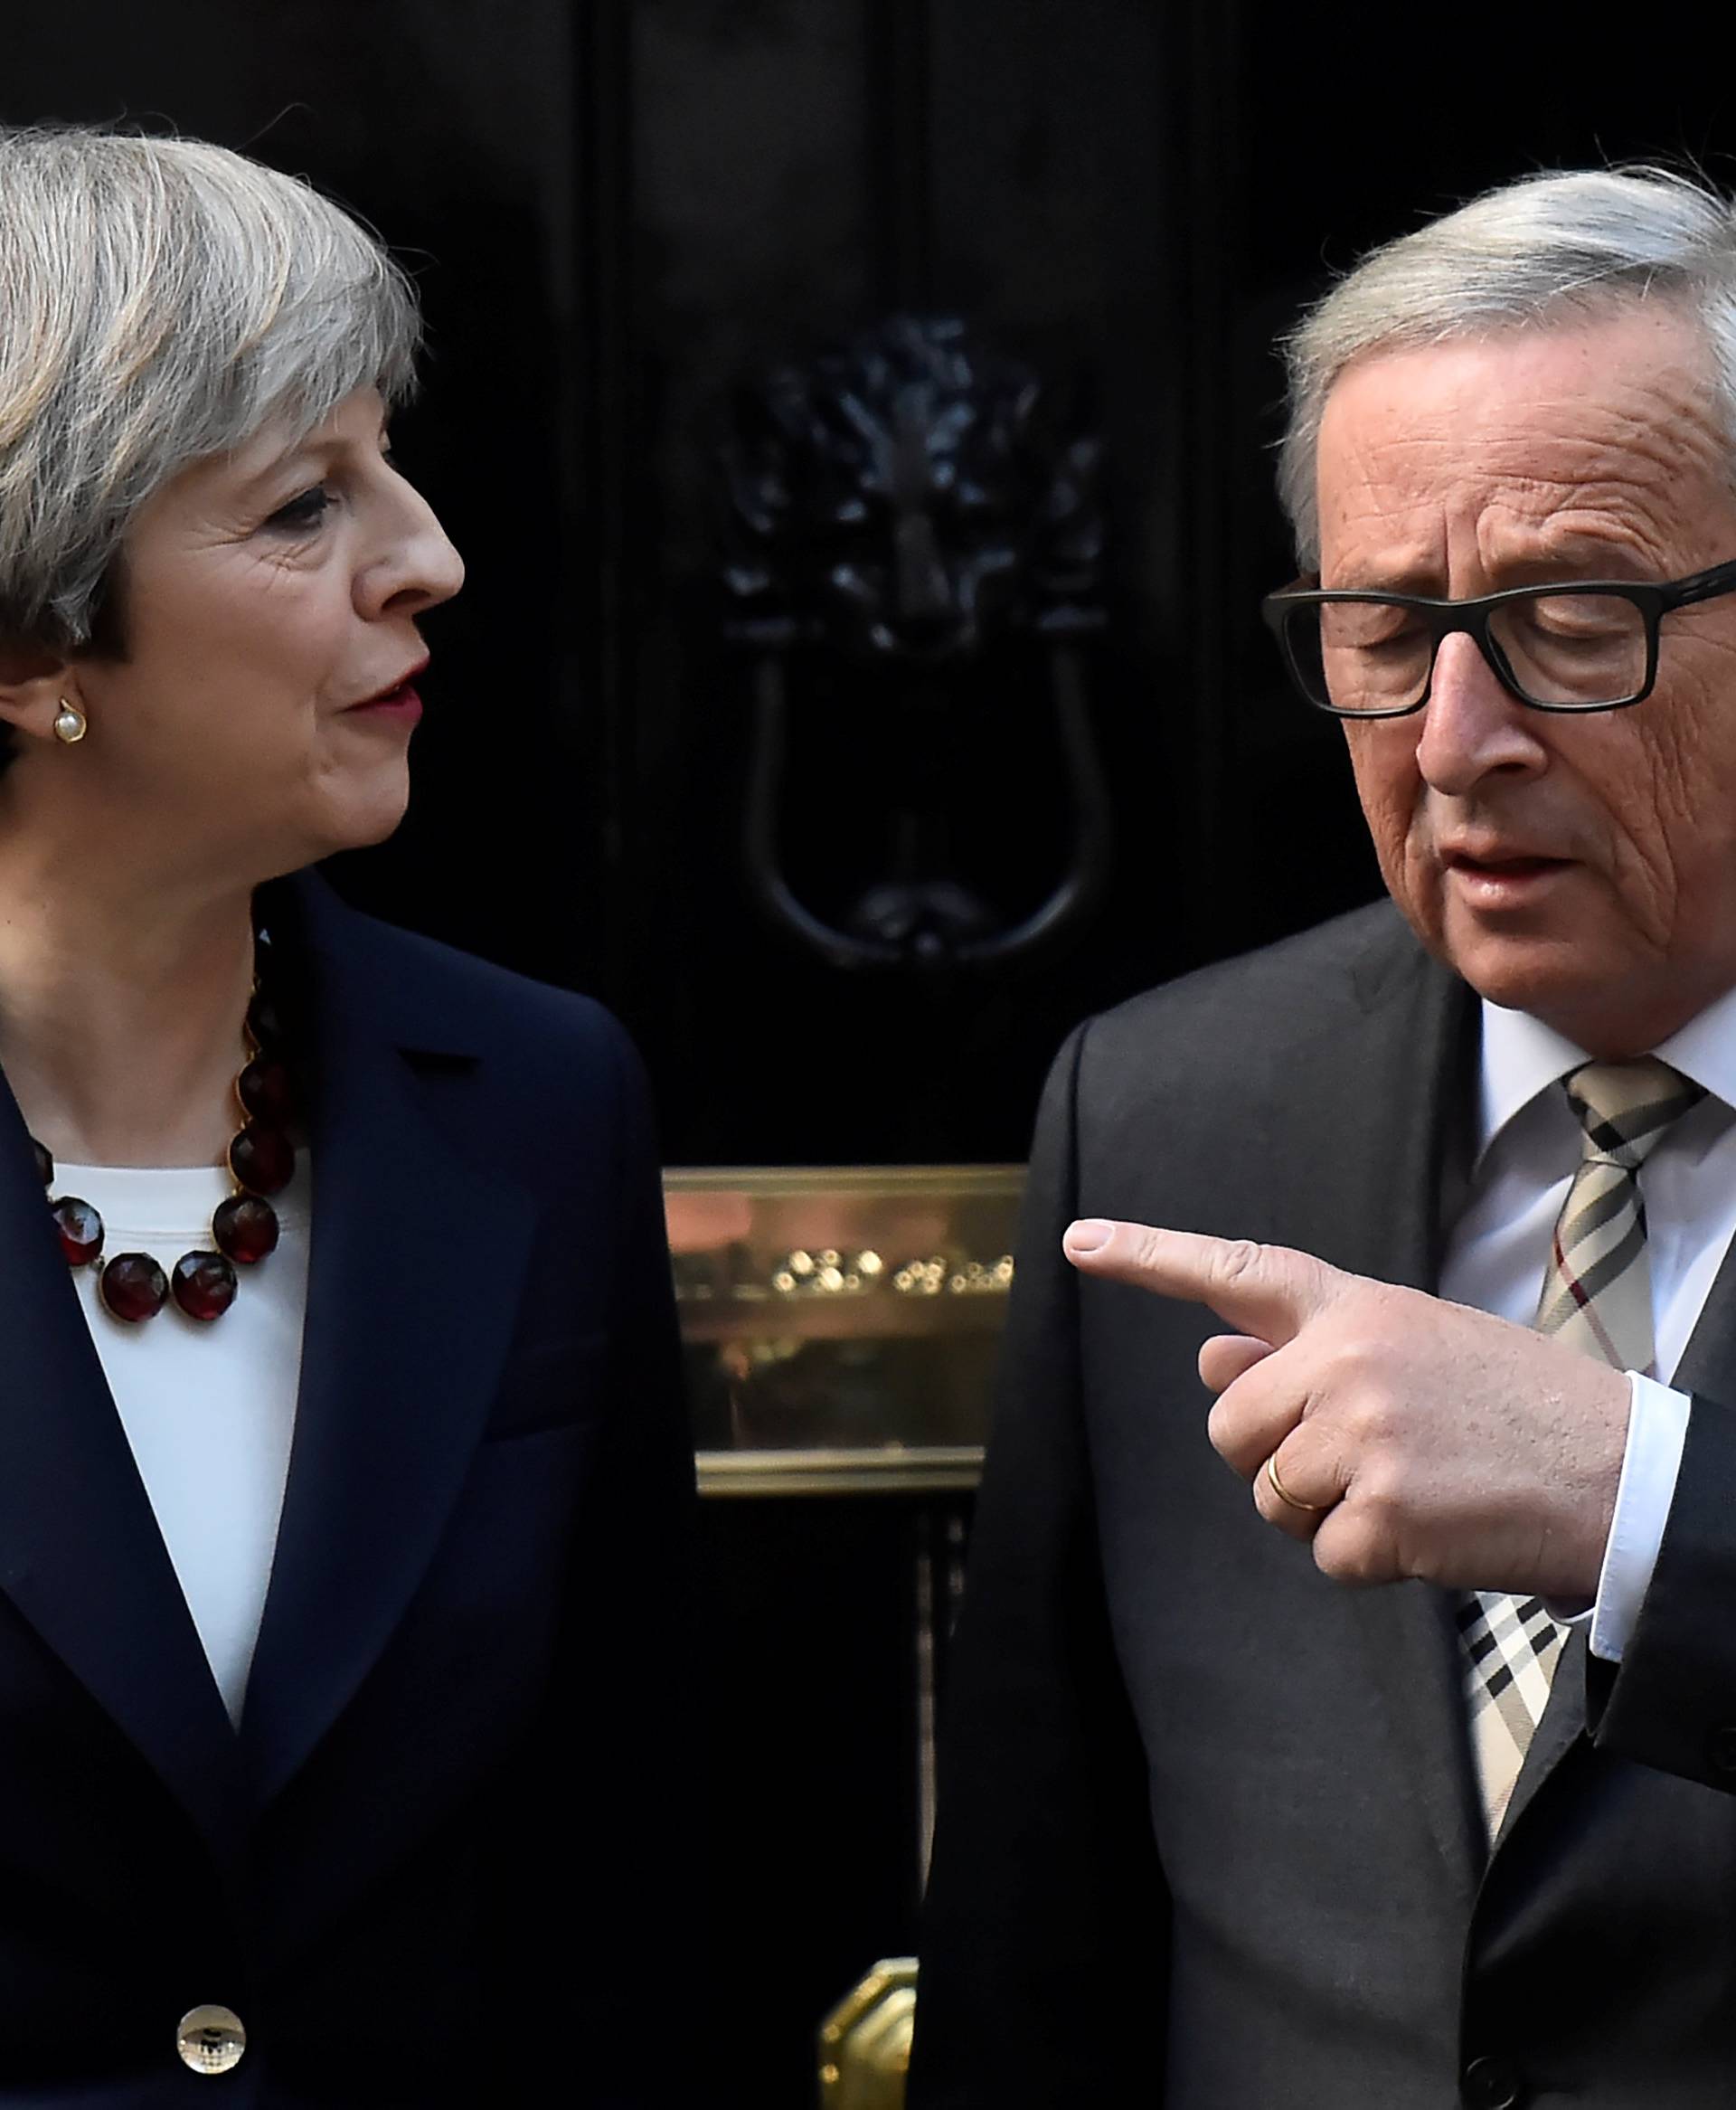 Britain's Prime Minister Theresa May welcomes Head of the European Commission, President Juncker to Downing Street in London